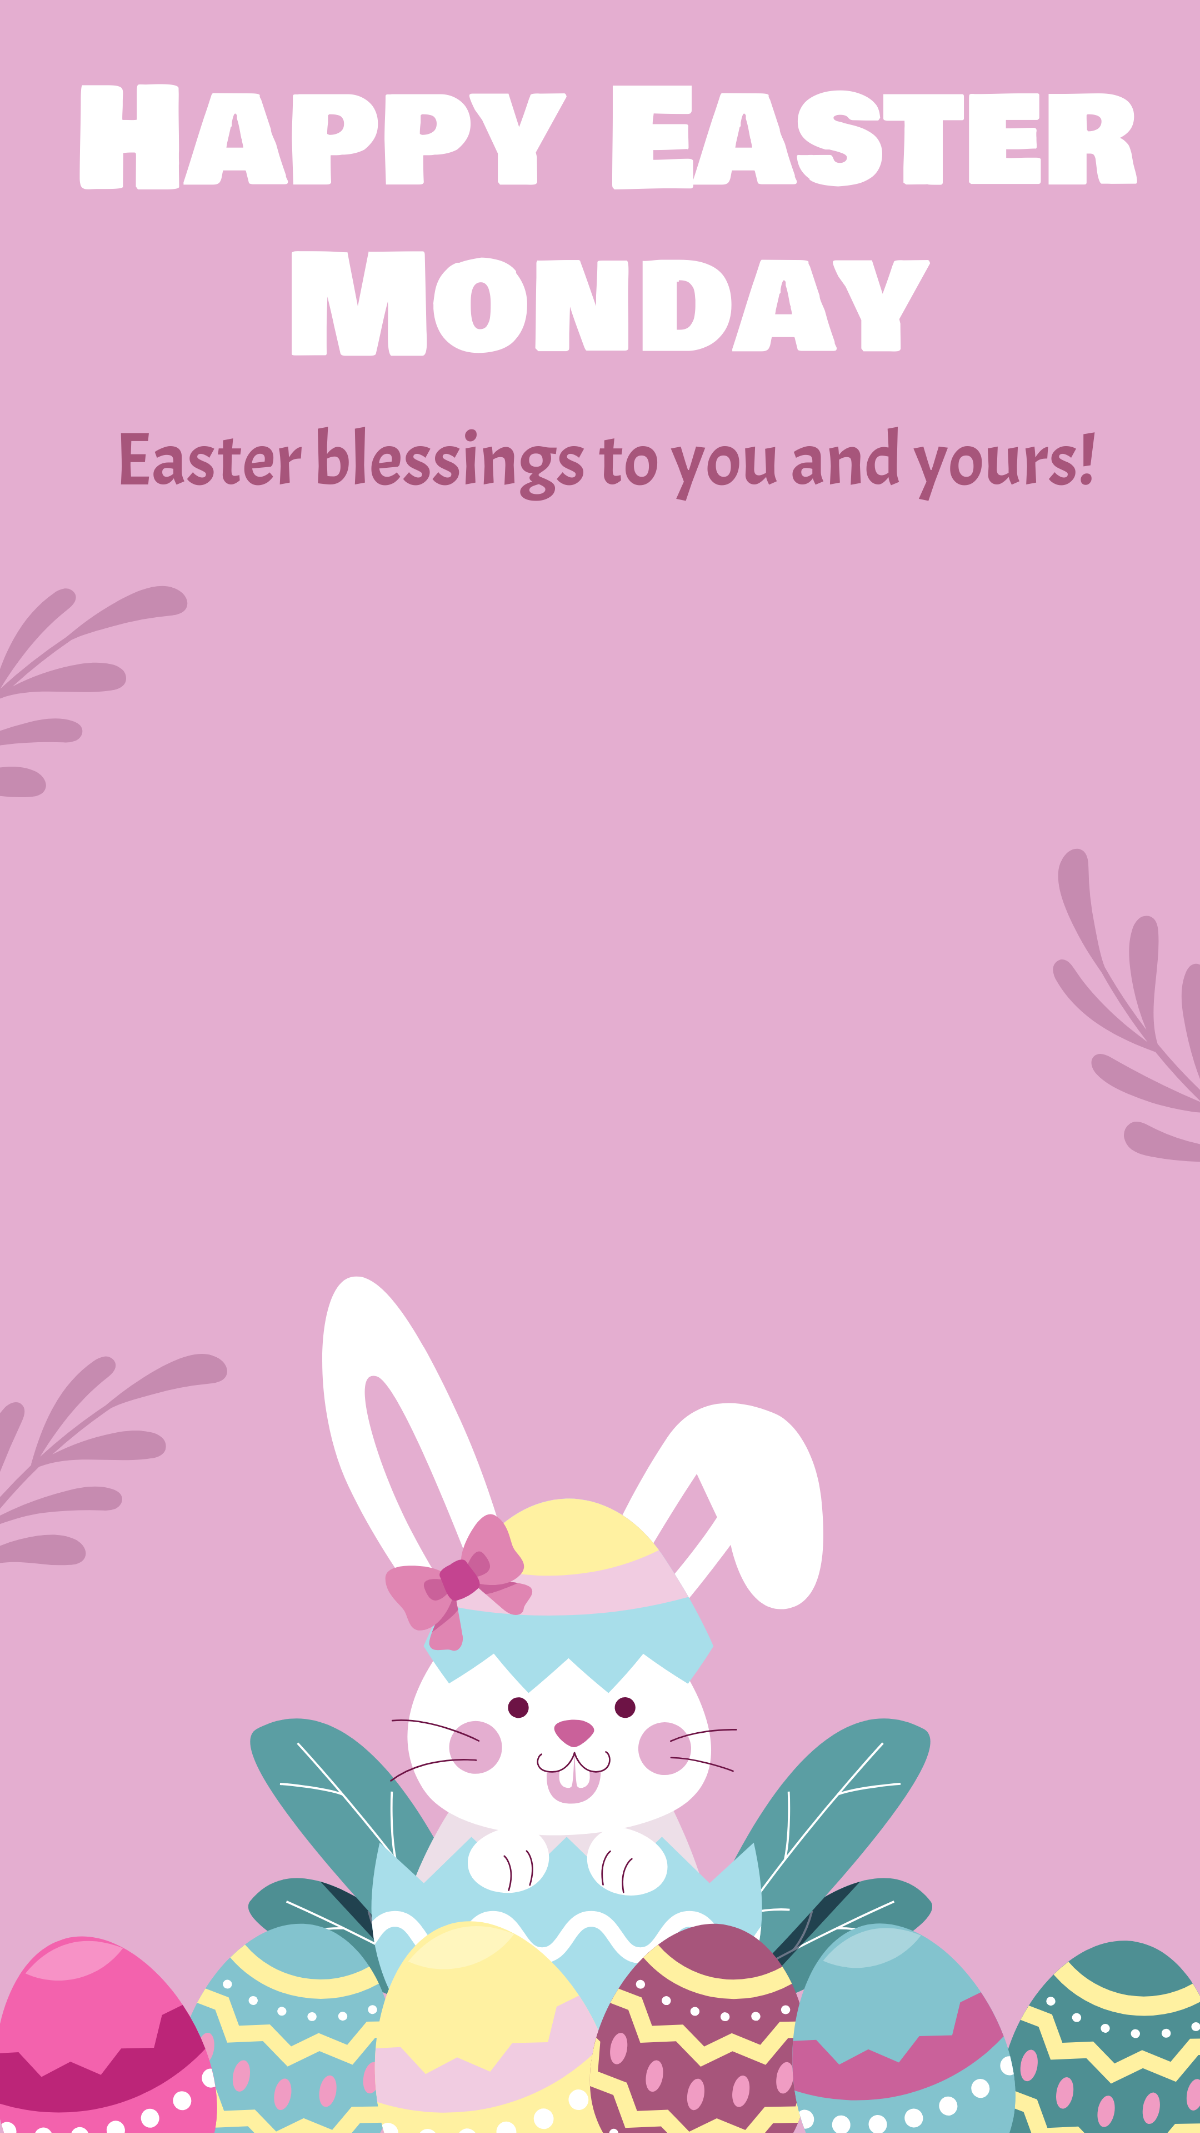 Easter Monday Snapchat Geofilter